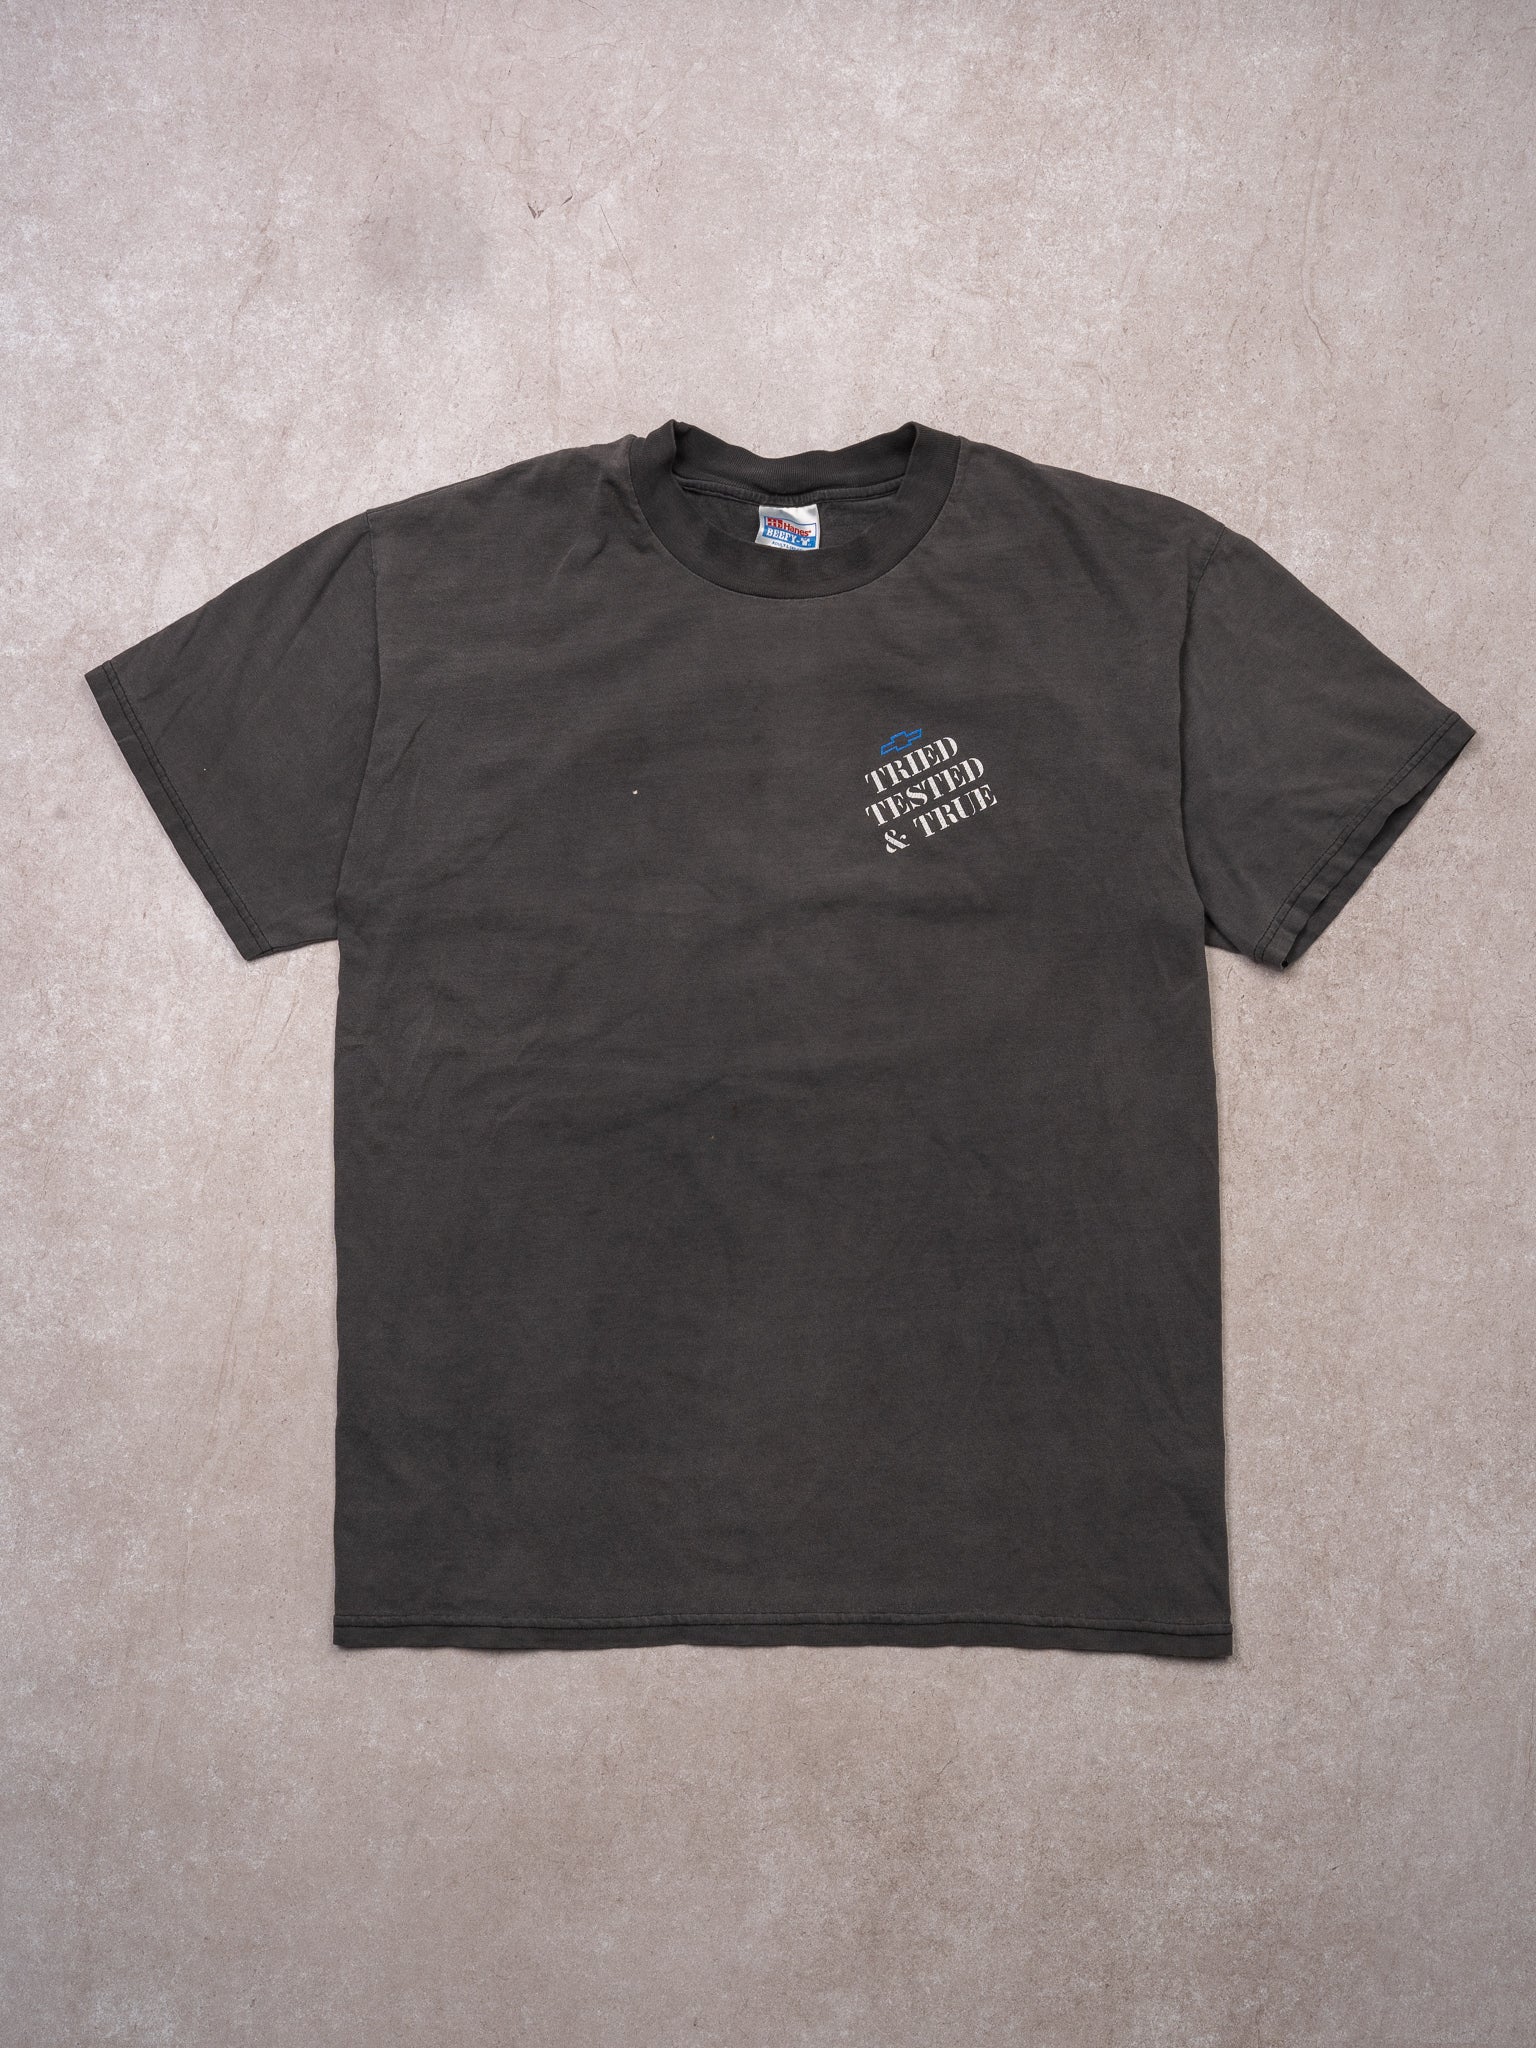 Vintage Grey Tried, Tested and True Chevrolet Tee (M)